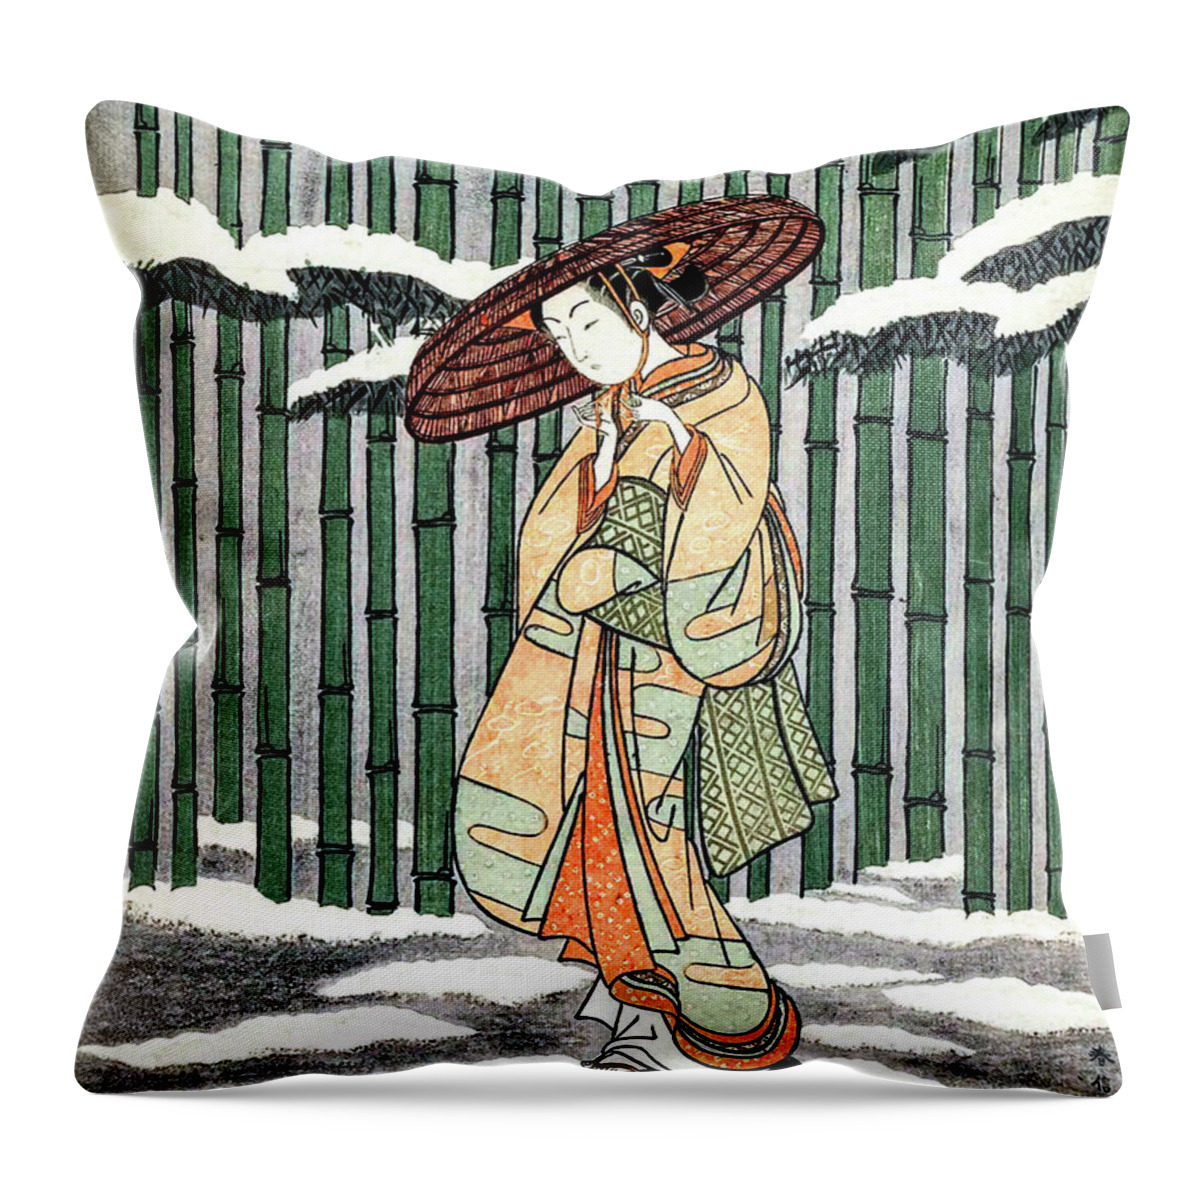 Japan Throw Pillow featuring the digital art Woman Walk In Front of the Bamboo Fence by Long Shot